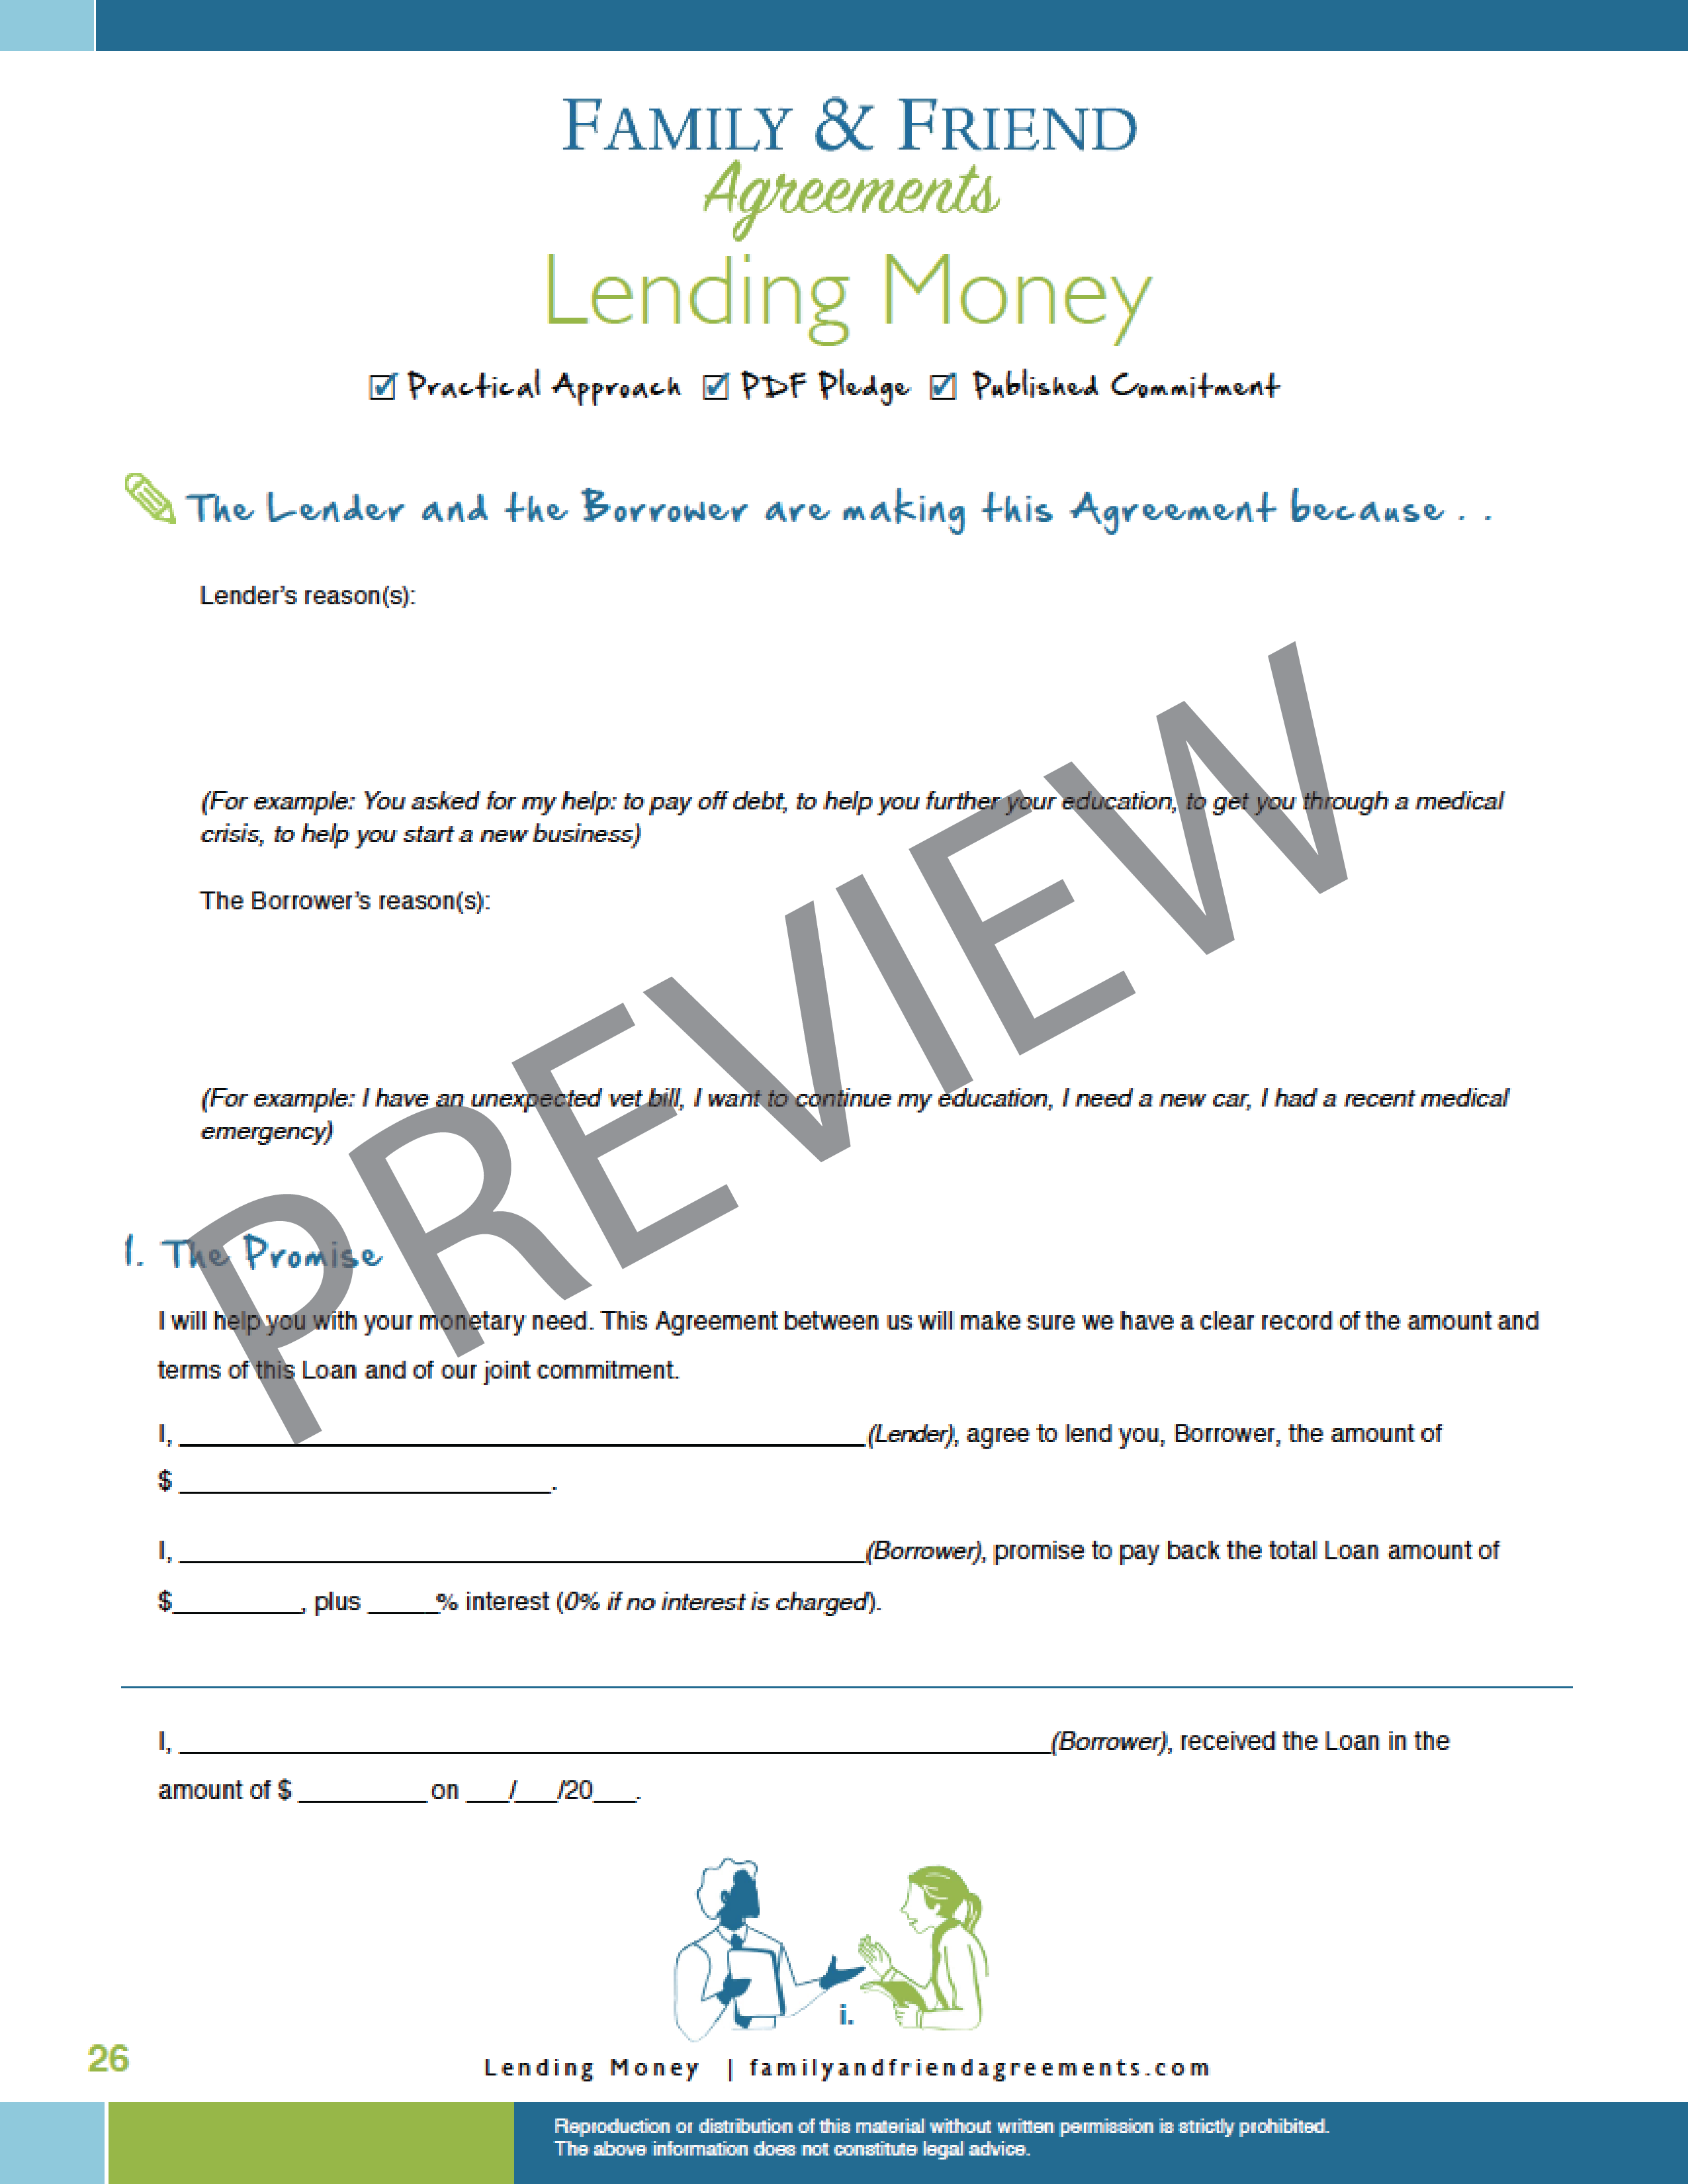 Lending Money Agreement Family and Friend Agreements